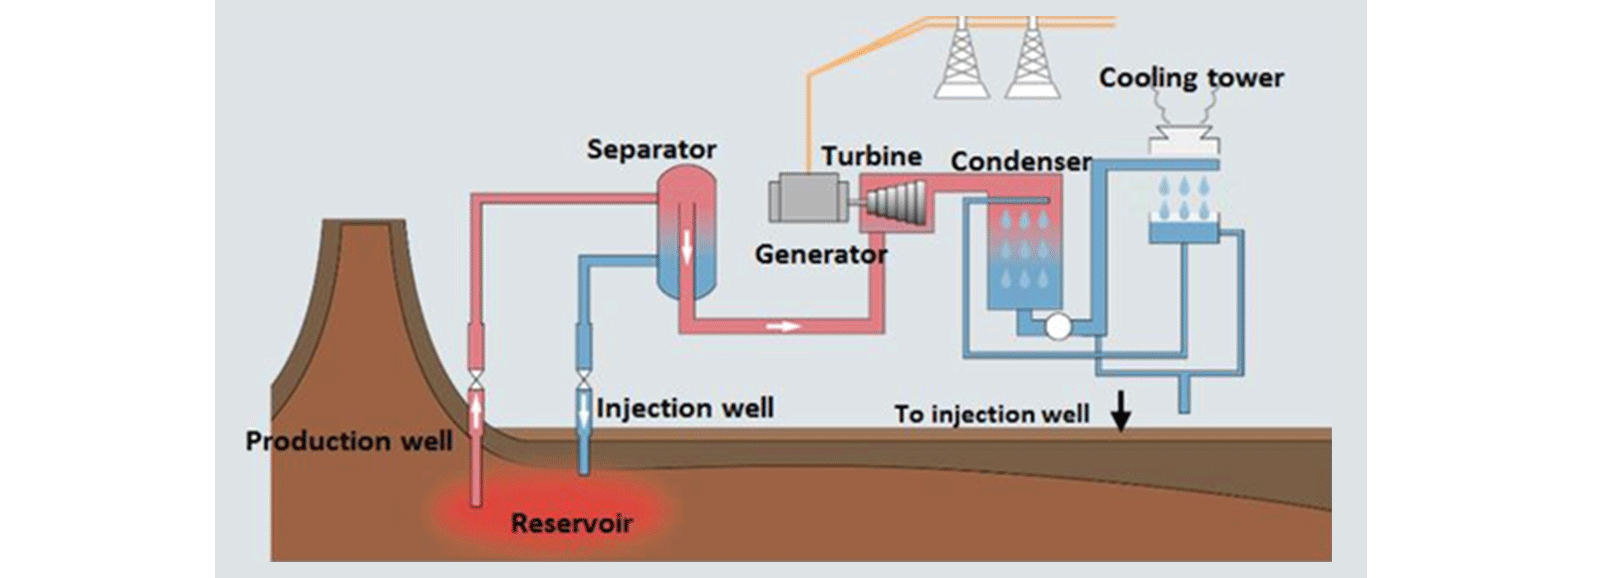 Geothermal power plant: flash steam system